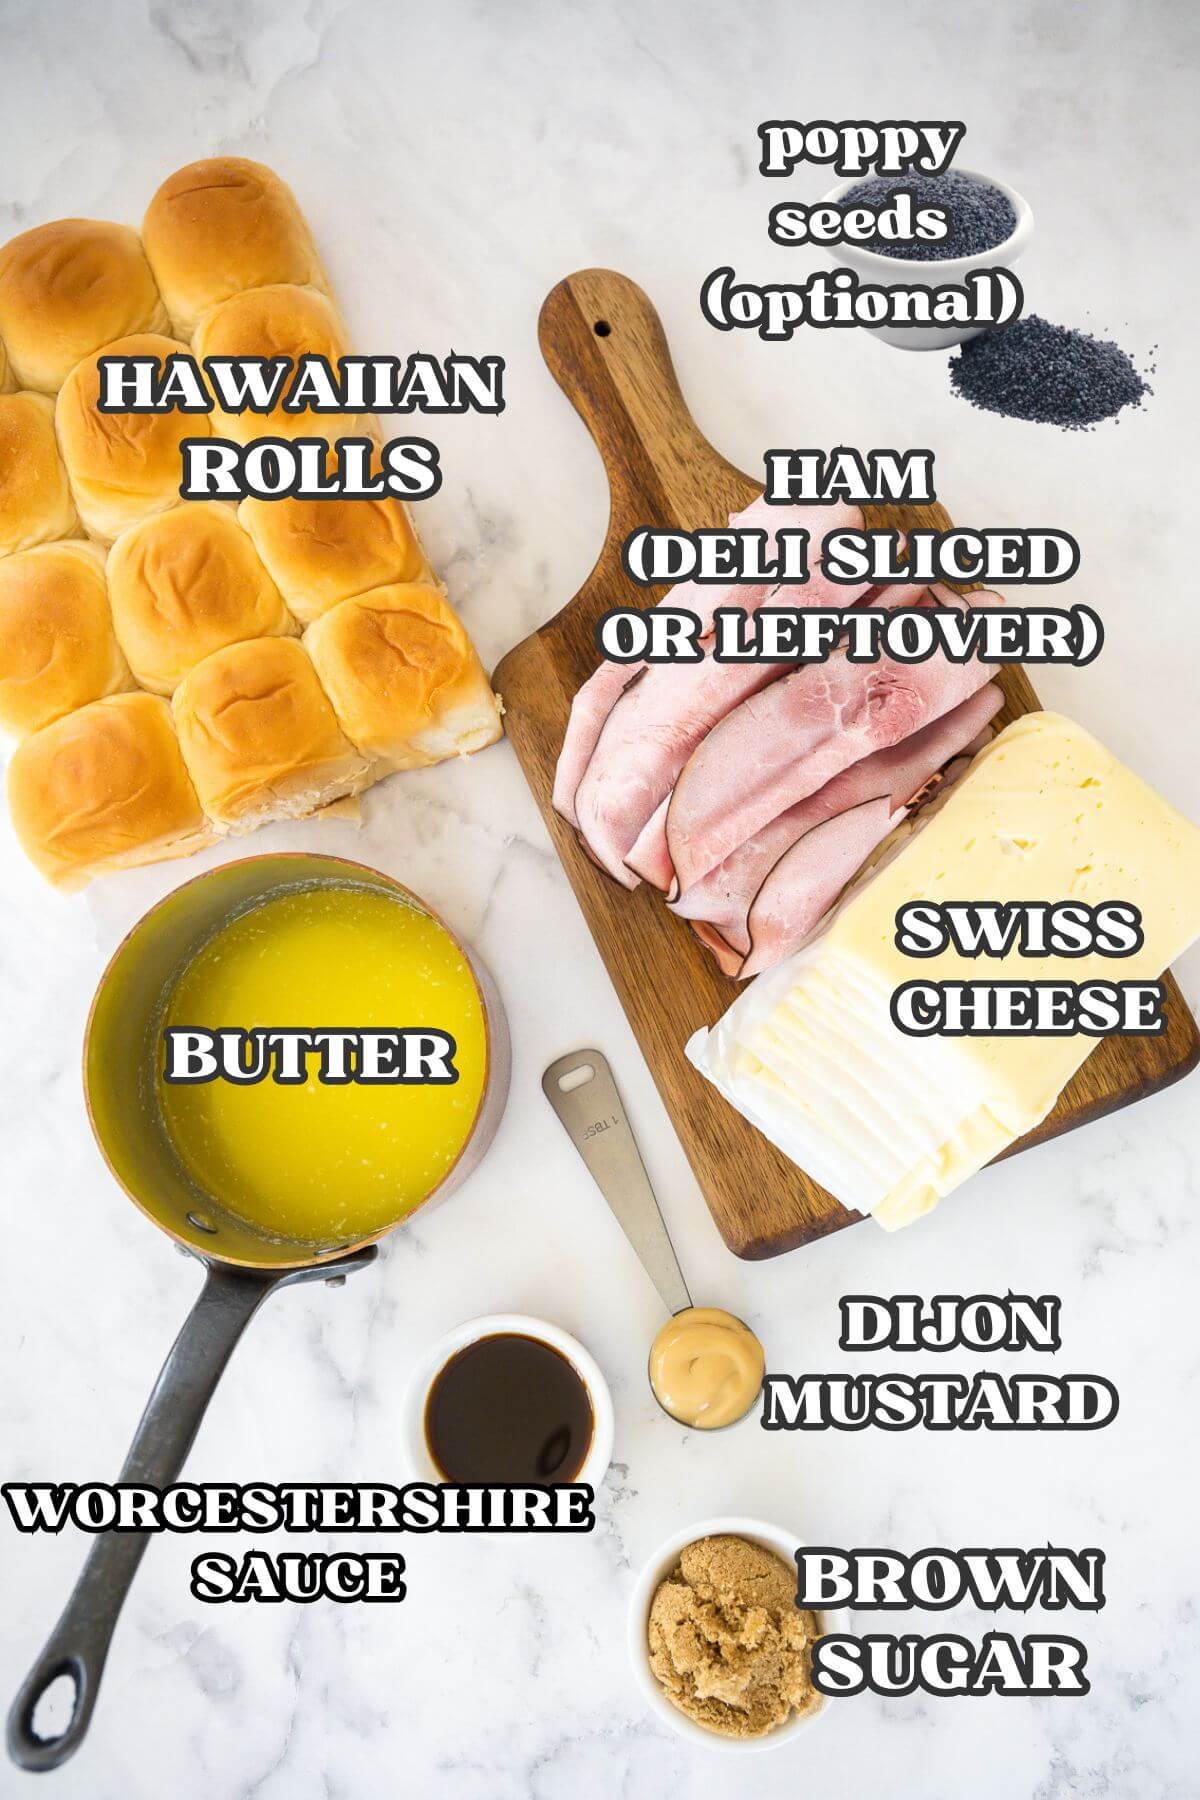 Labeled ingredients for funeral sandwiches, baked ham and cheese sliders.